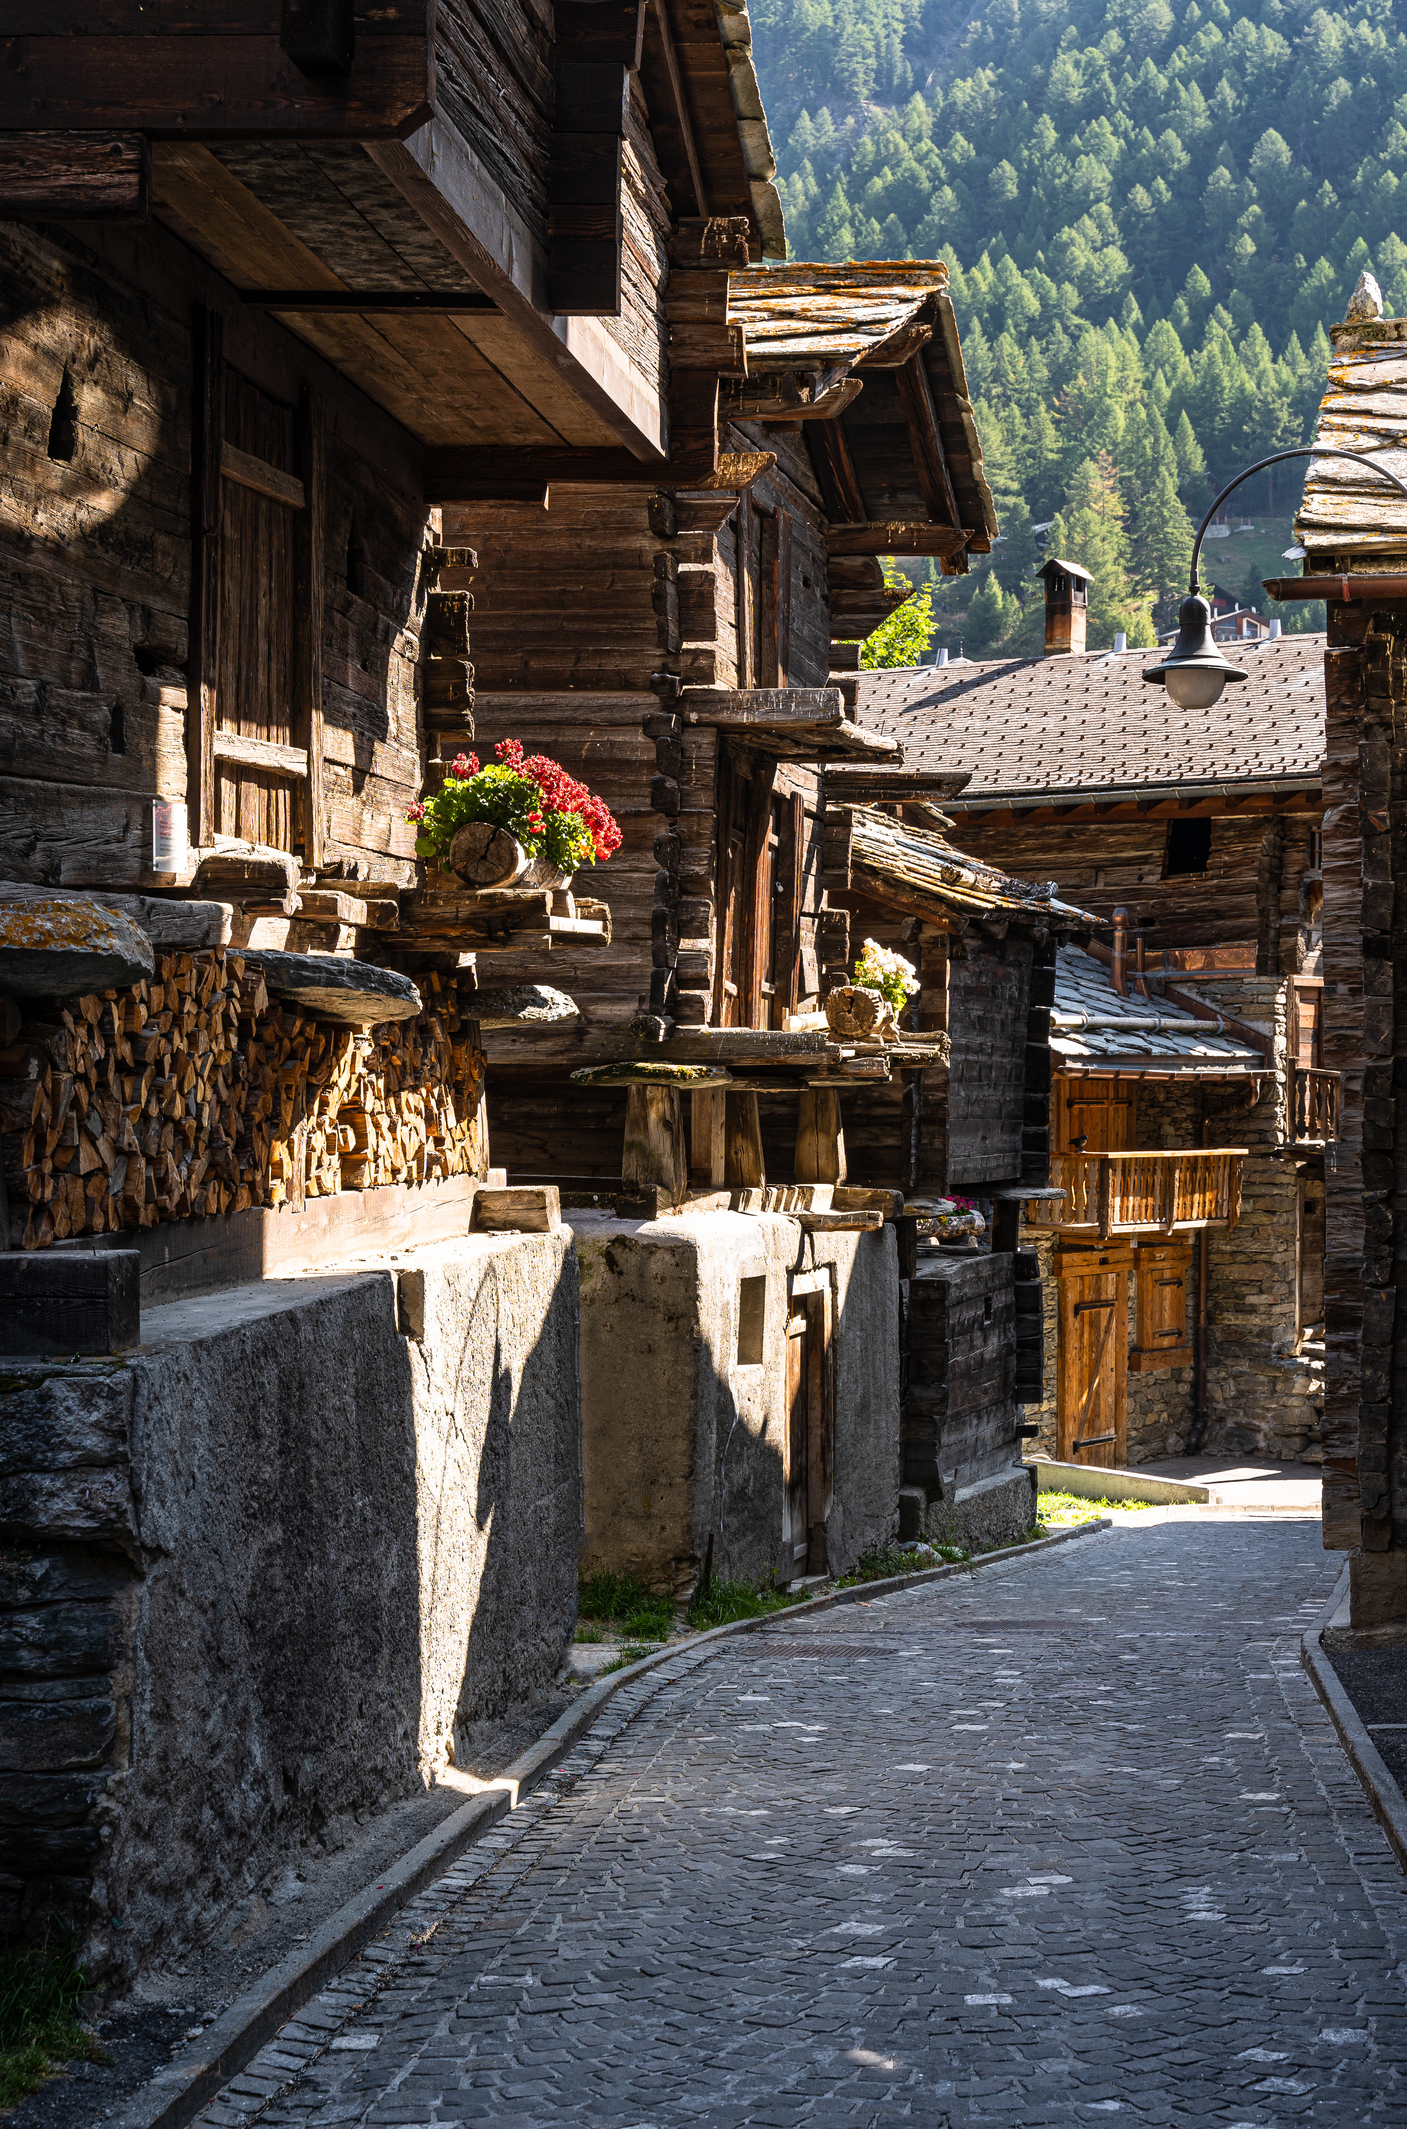 An Alpine town with cobblestone streets